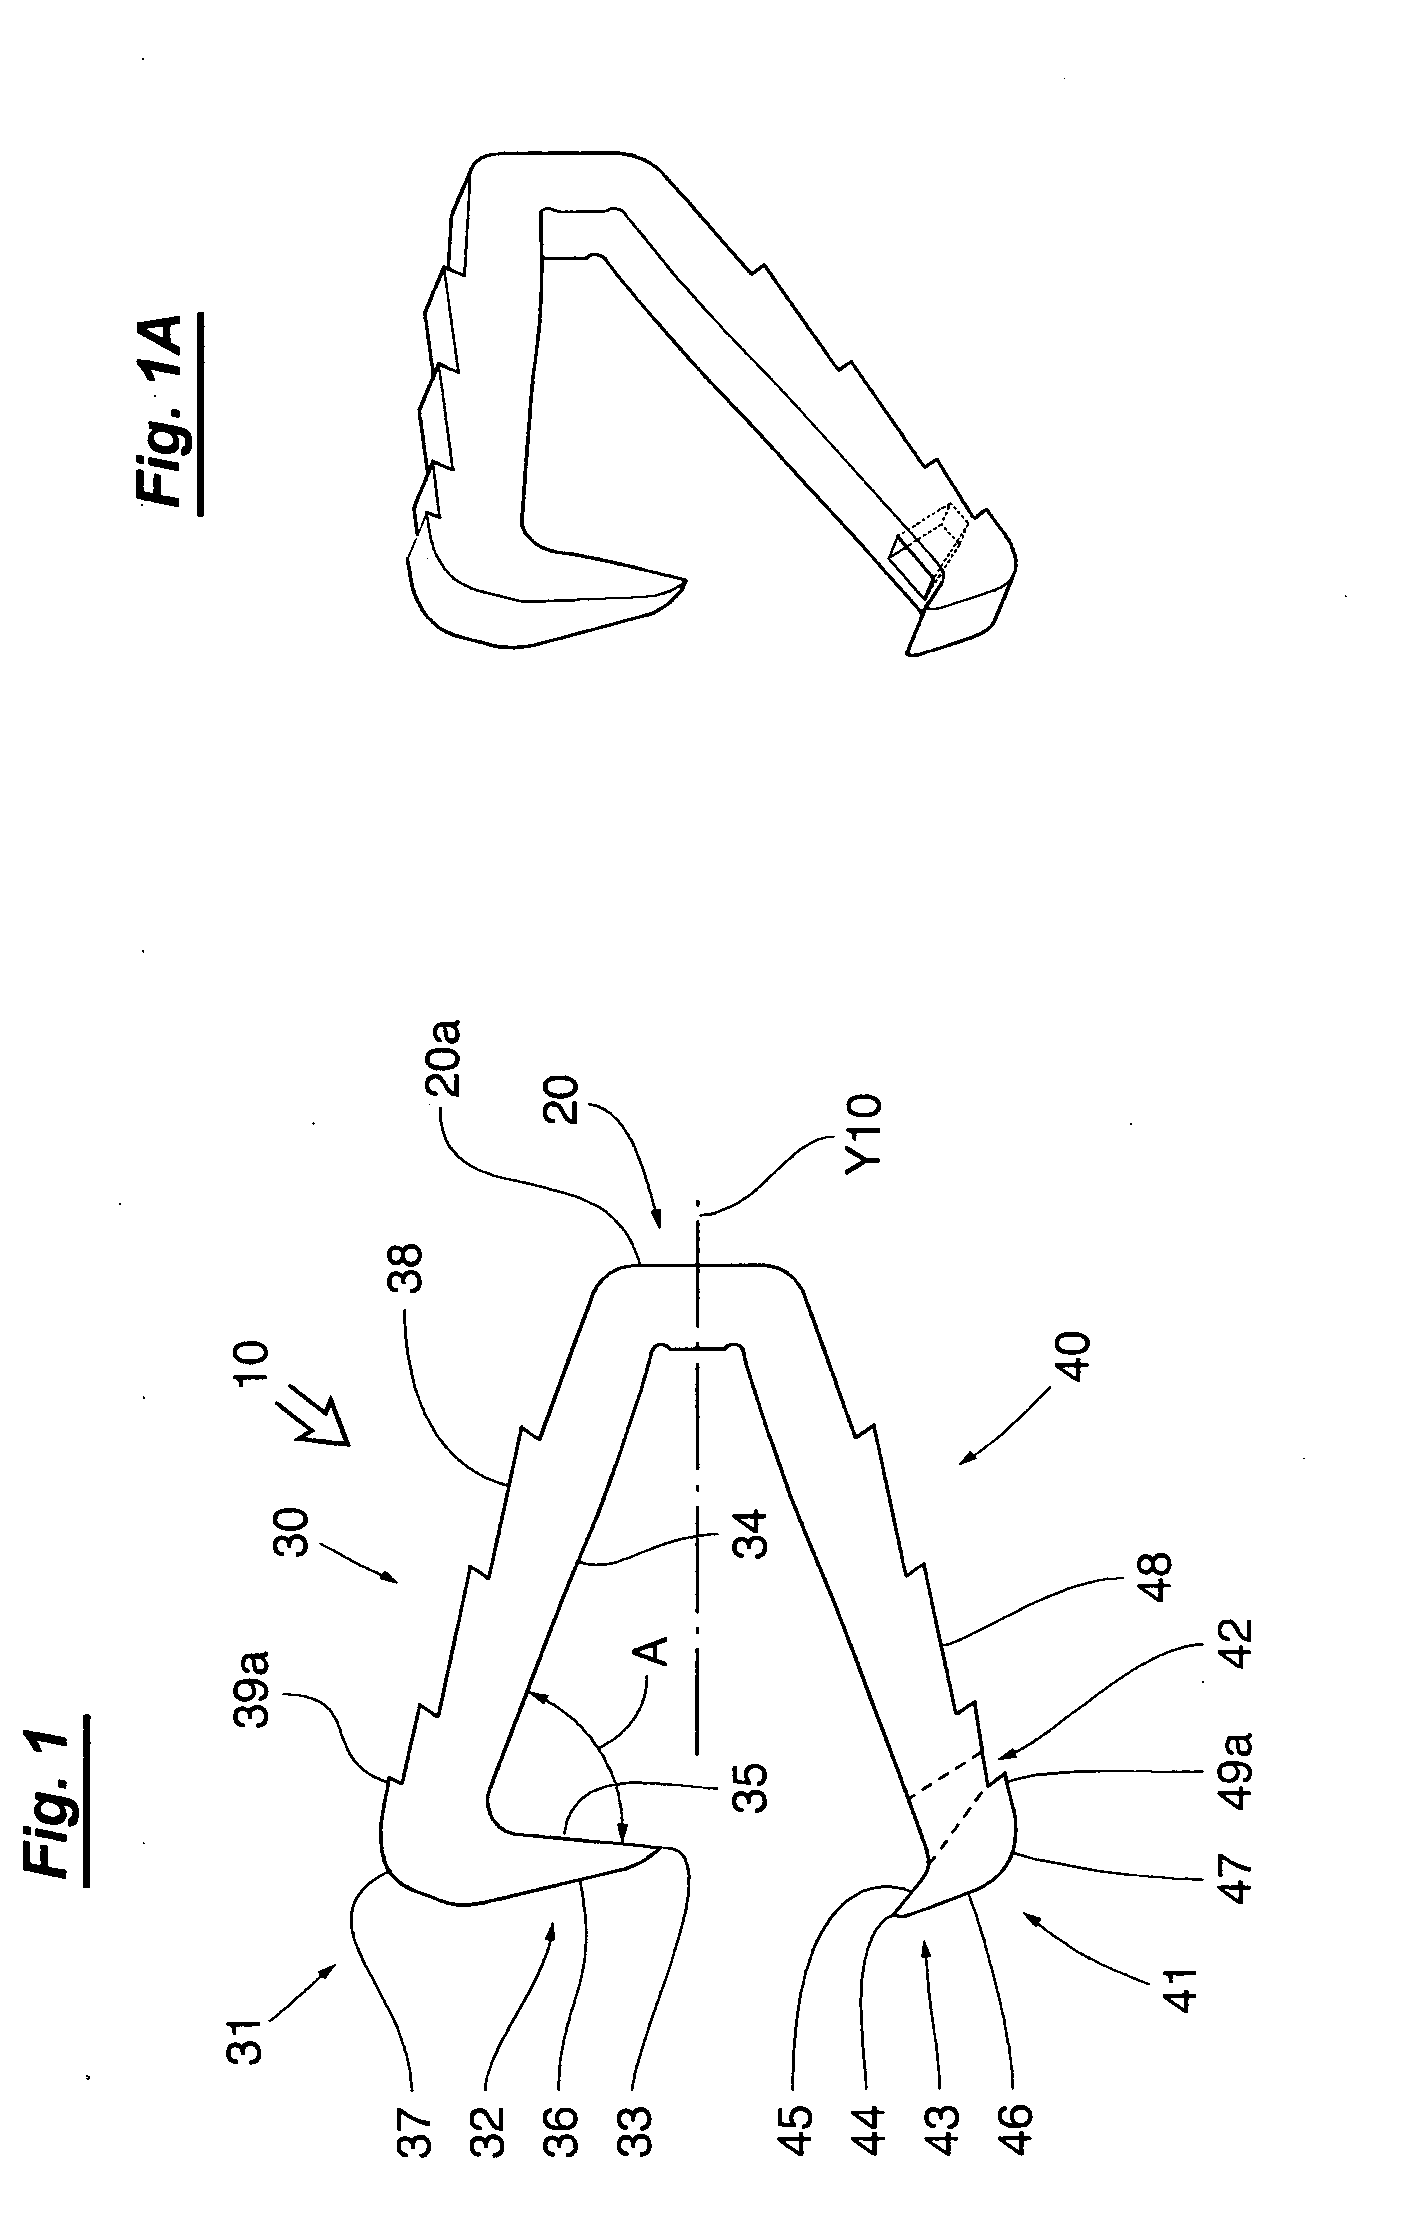 Anchor, system and method to attach a human tissue or suture to a bone